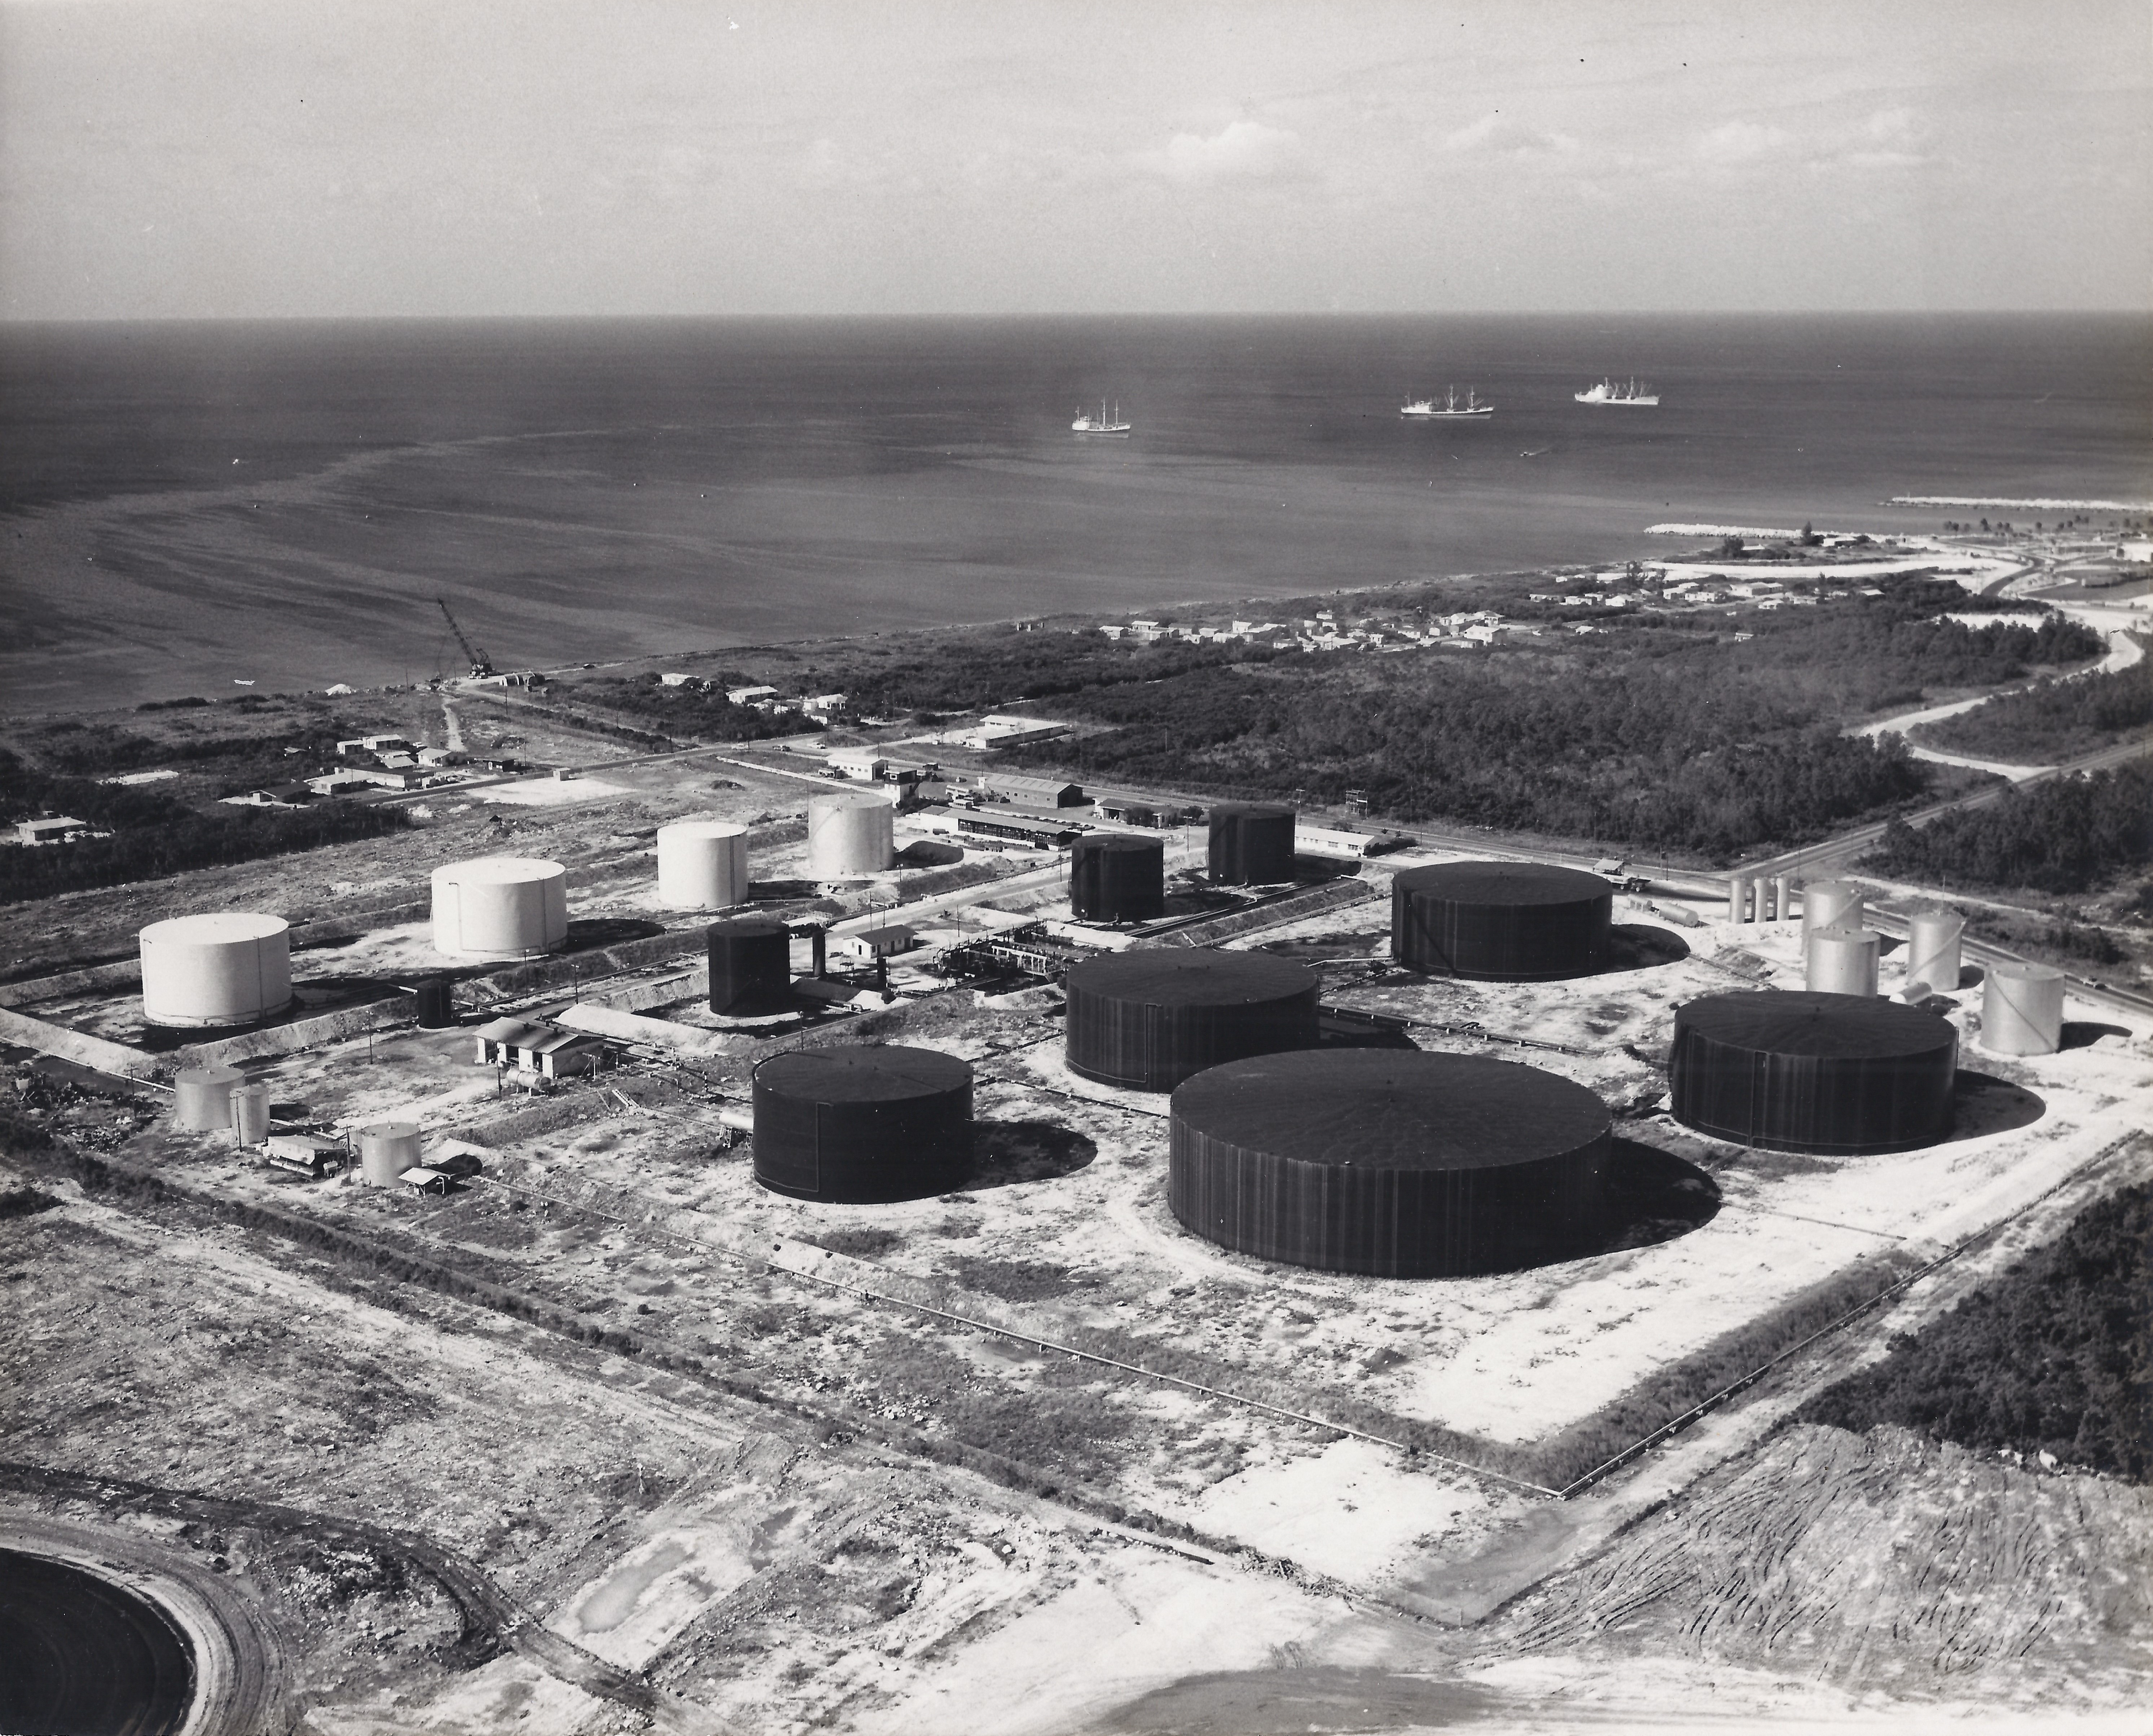 Freeport bunkering terminal, early 1960's